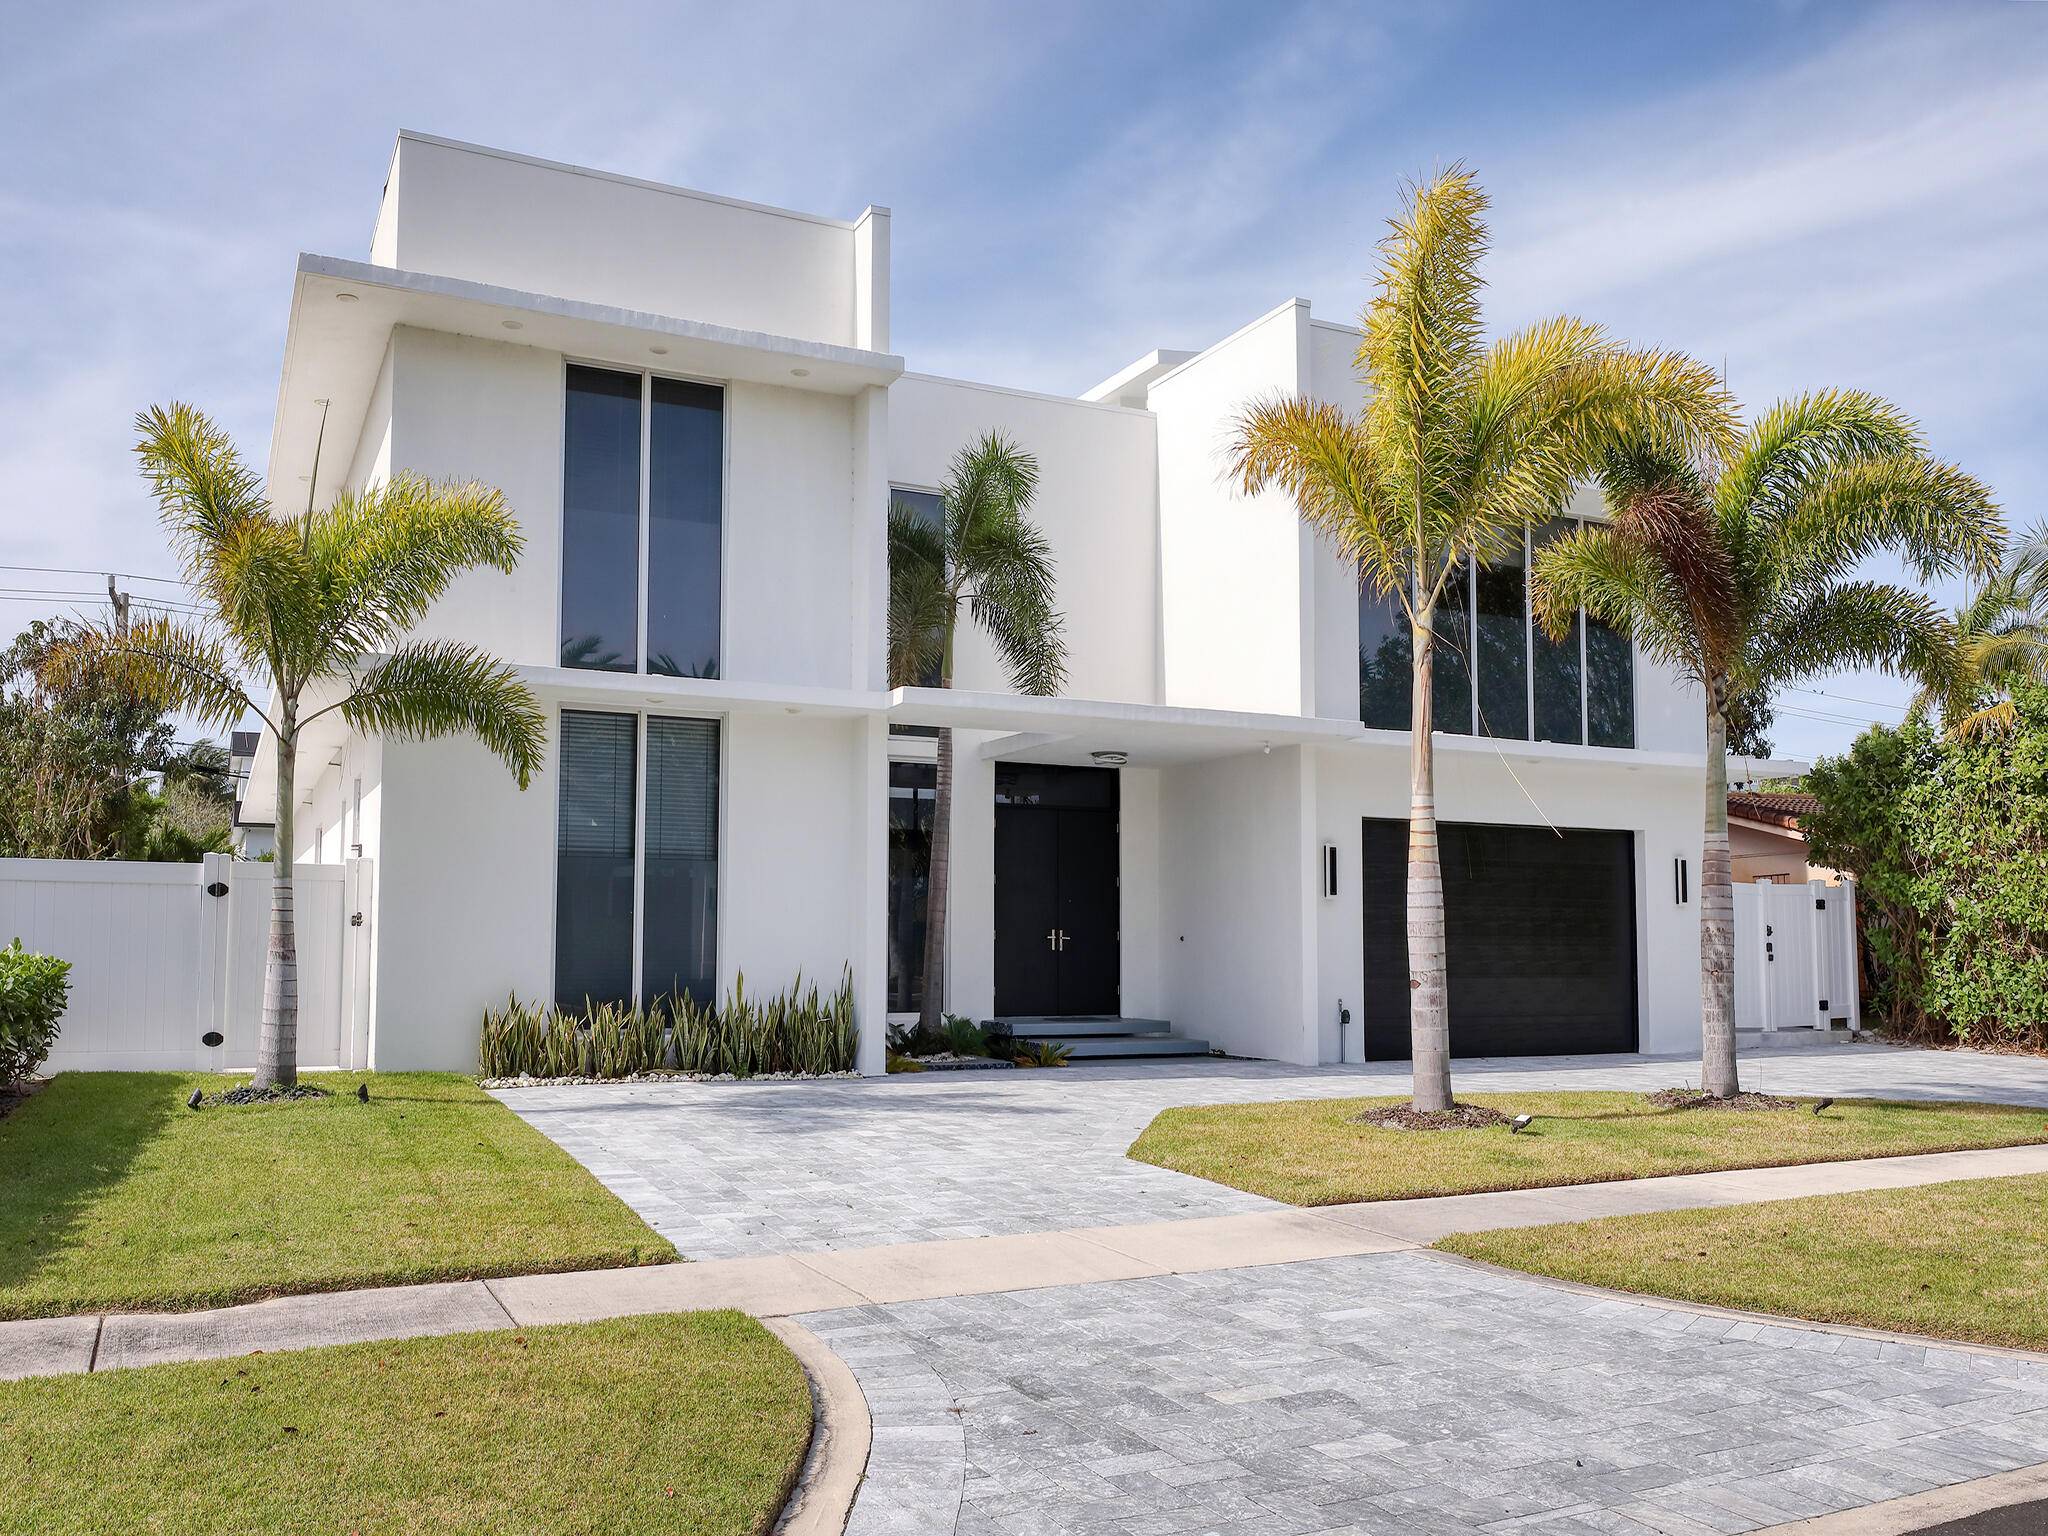 LOCATION IS EVERYTHING ! IN THE HEART OF EAST BOCA RATON, THIS BEAUTIFUL CONTEMPORARY ESTATE.